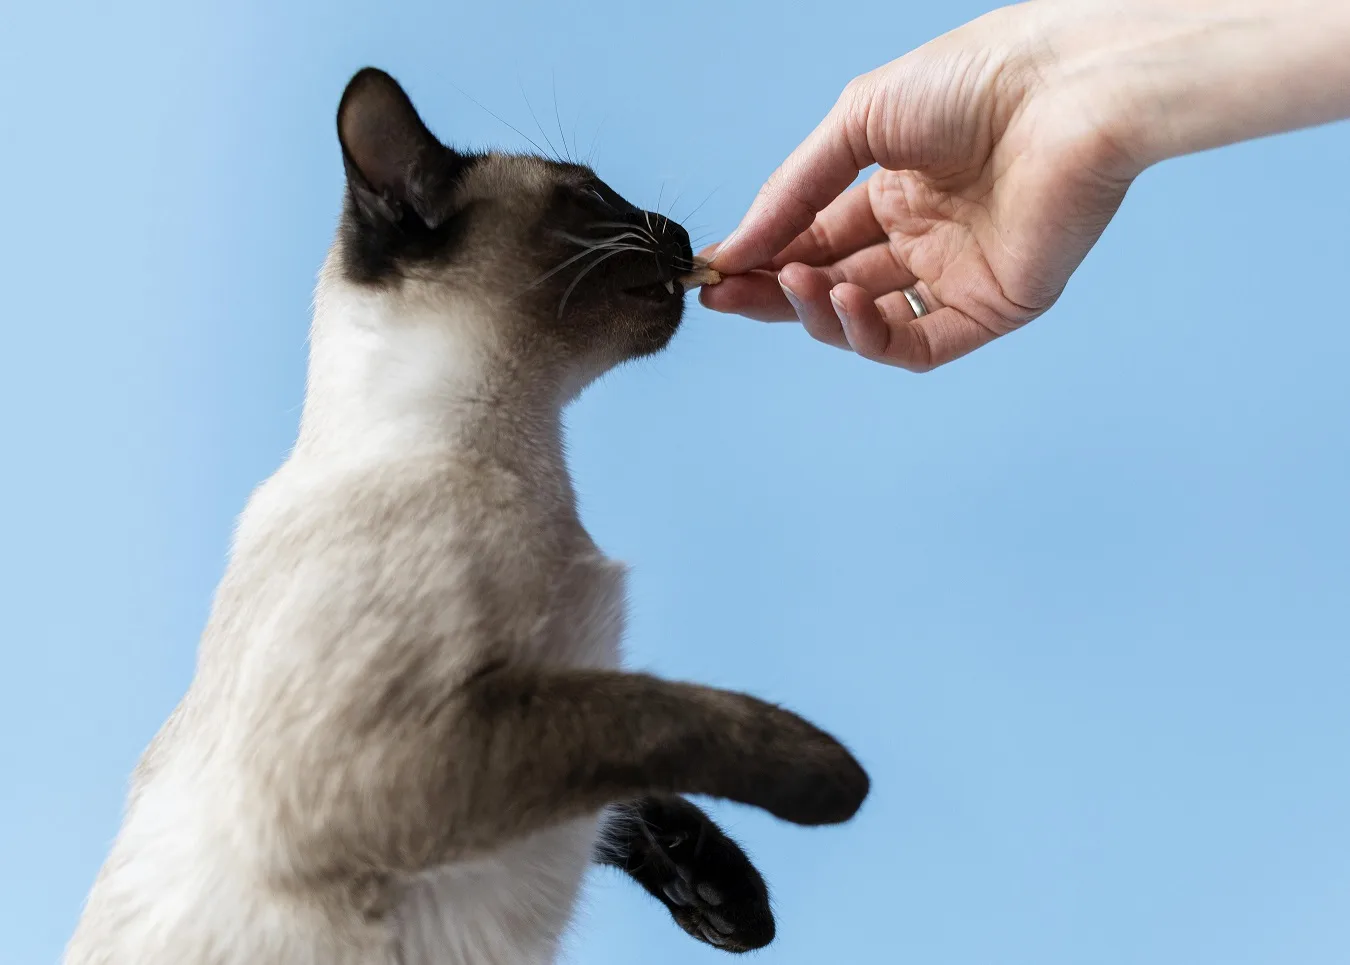 A Siamese cat is taking pills as medicine by the owner